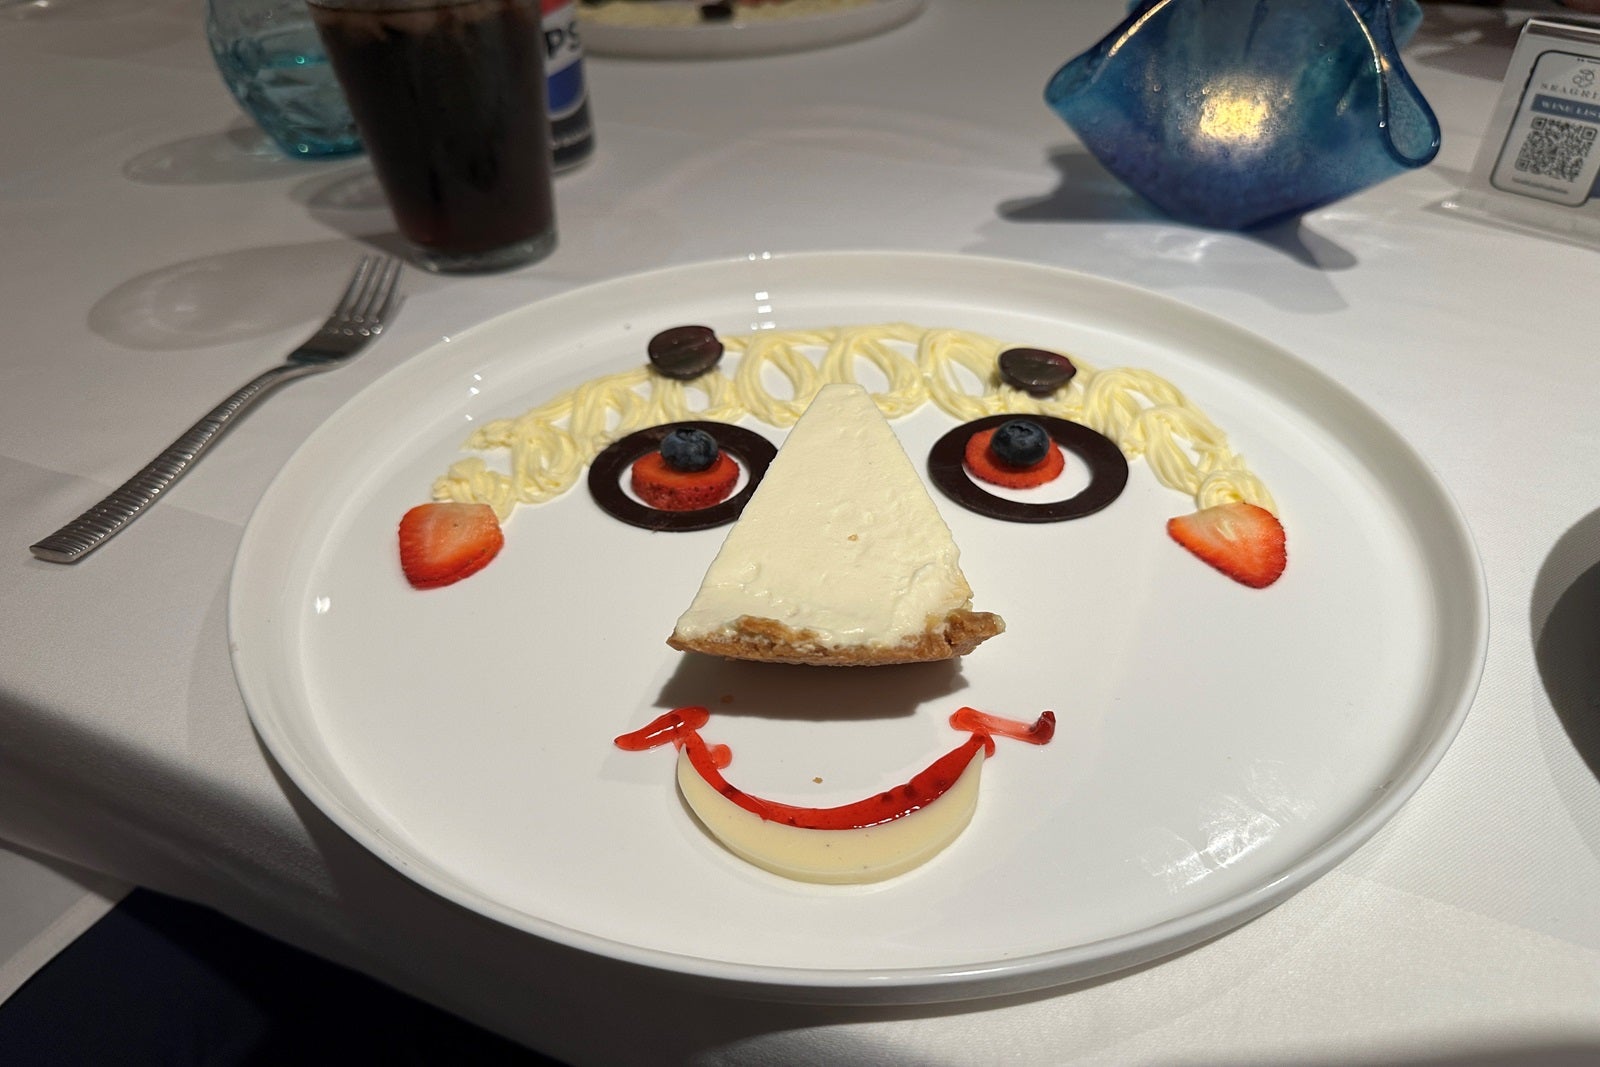 Dessert laid out to look like a face on a white plate